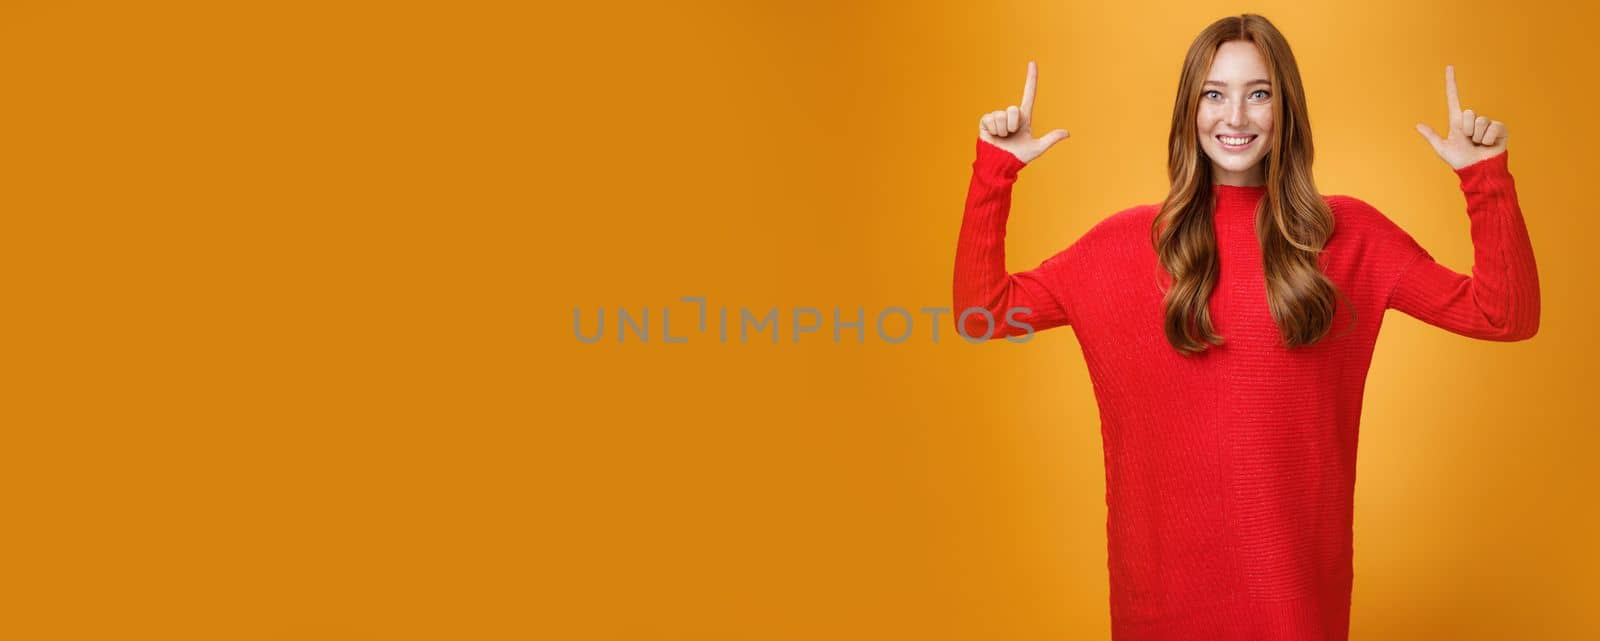 Enthusiastic and excited energized redhead female in red warm sweater pointing up with rised hands and smiling broadly thrilled with awesome promotion, feeling astonished against orange background.